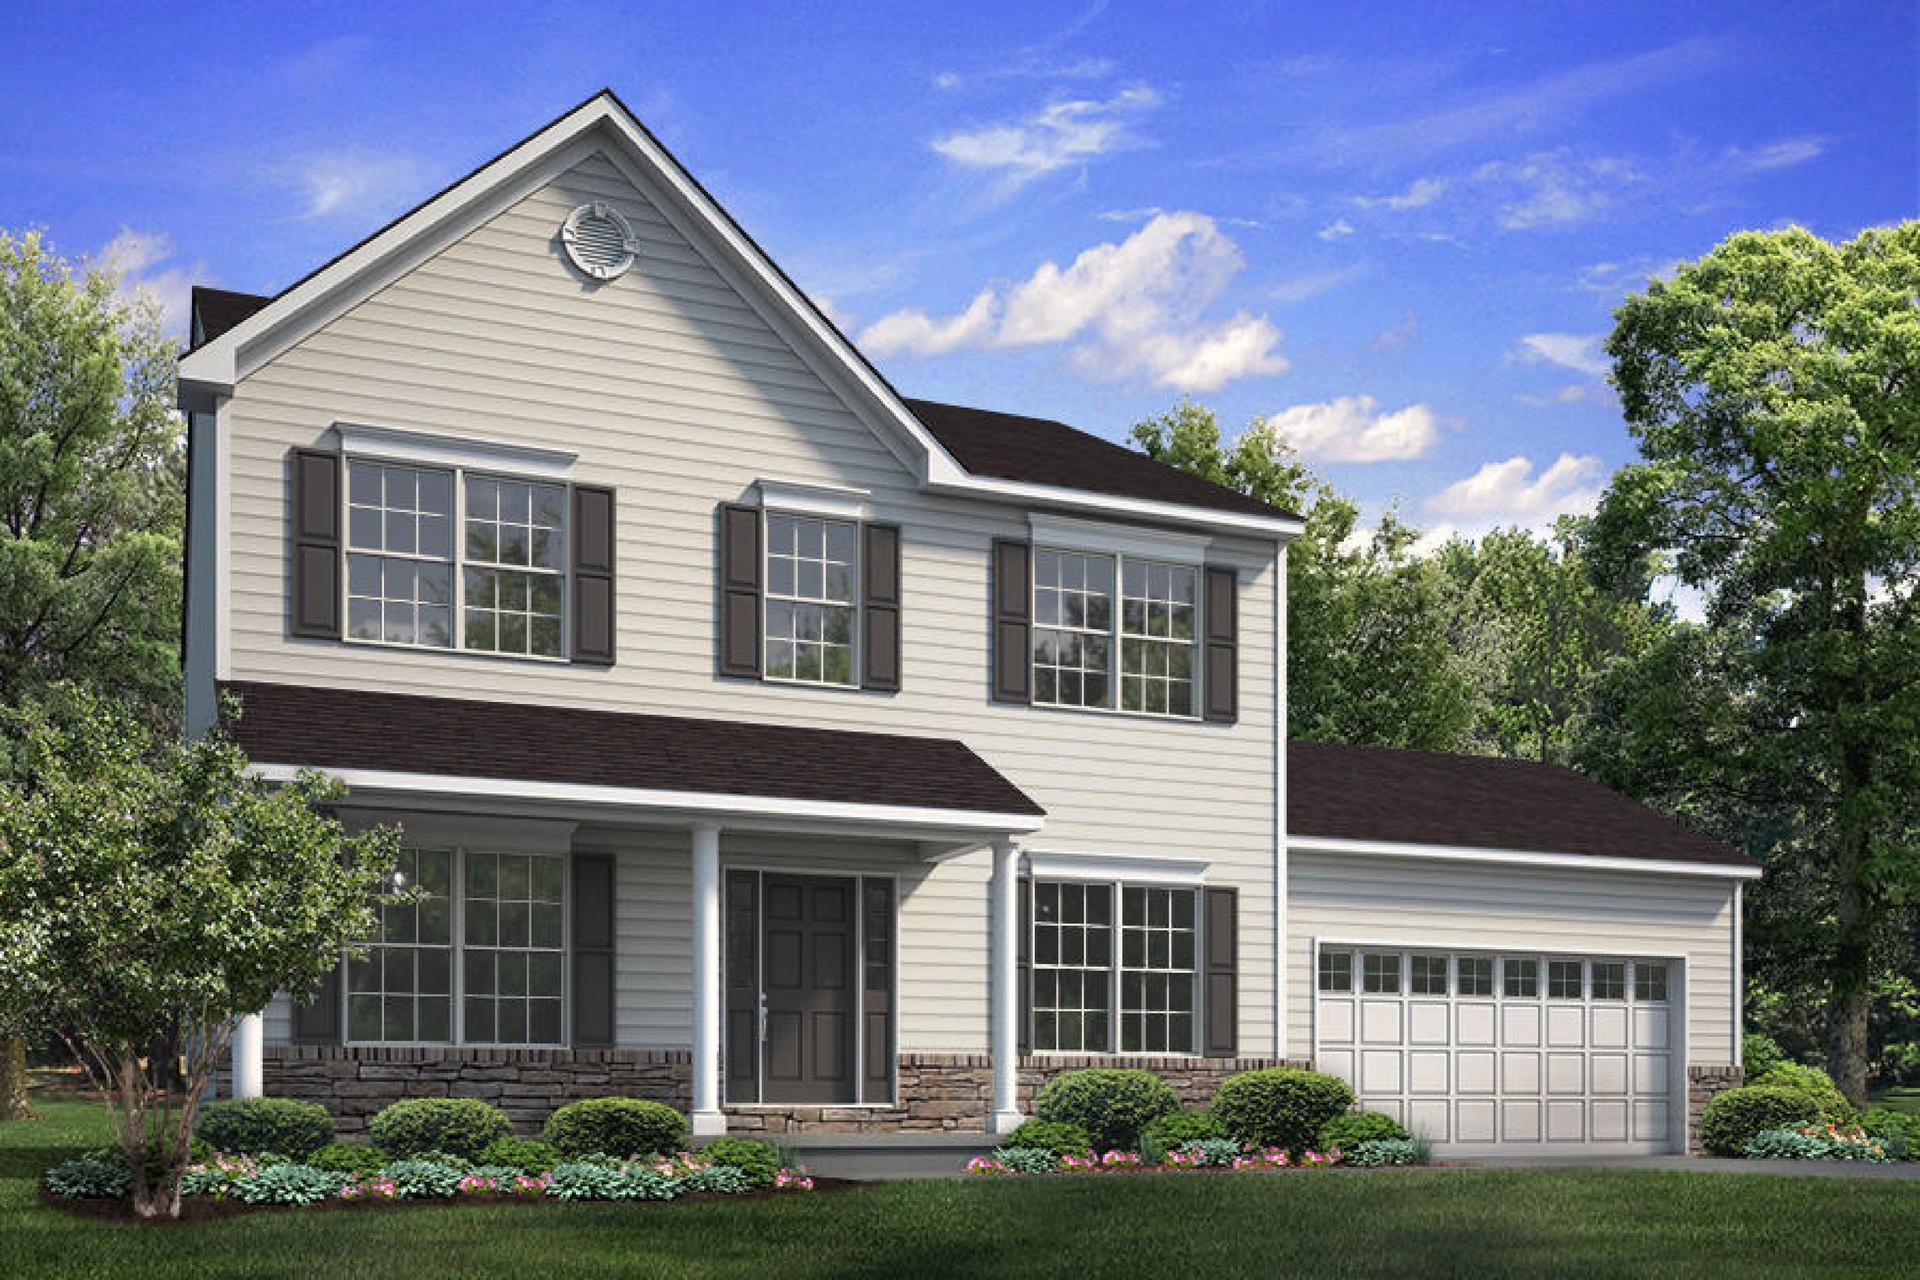 The Chapman New Home in Coopersburg PA - Oxford Ridge